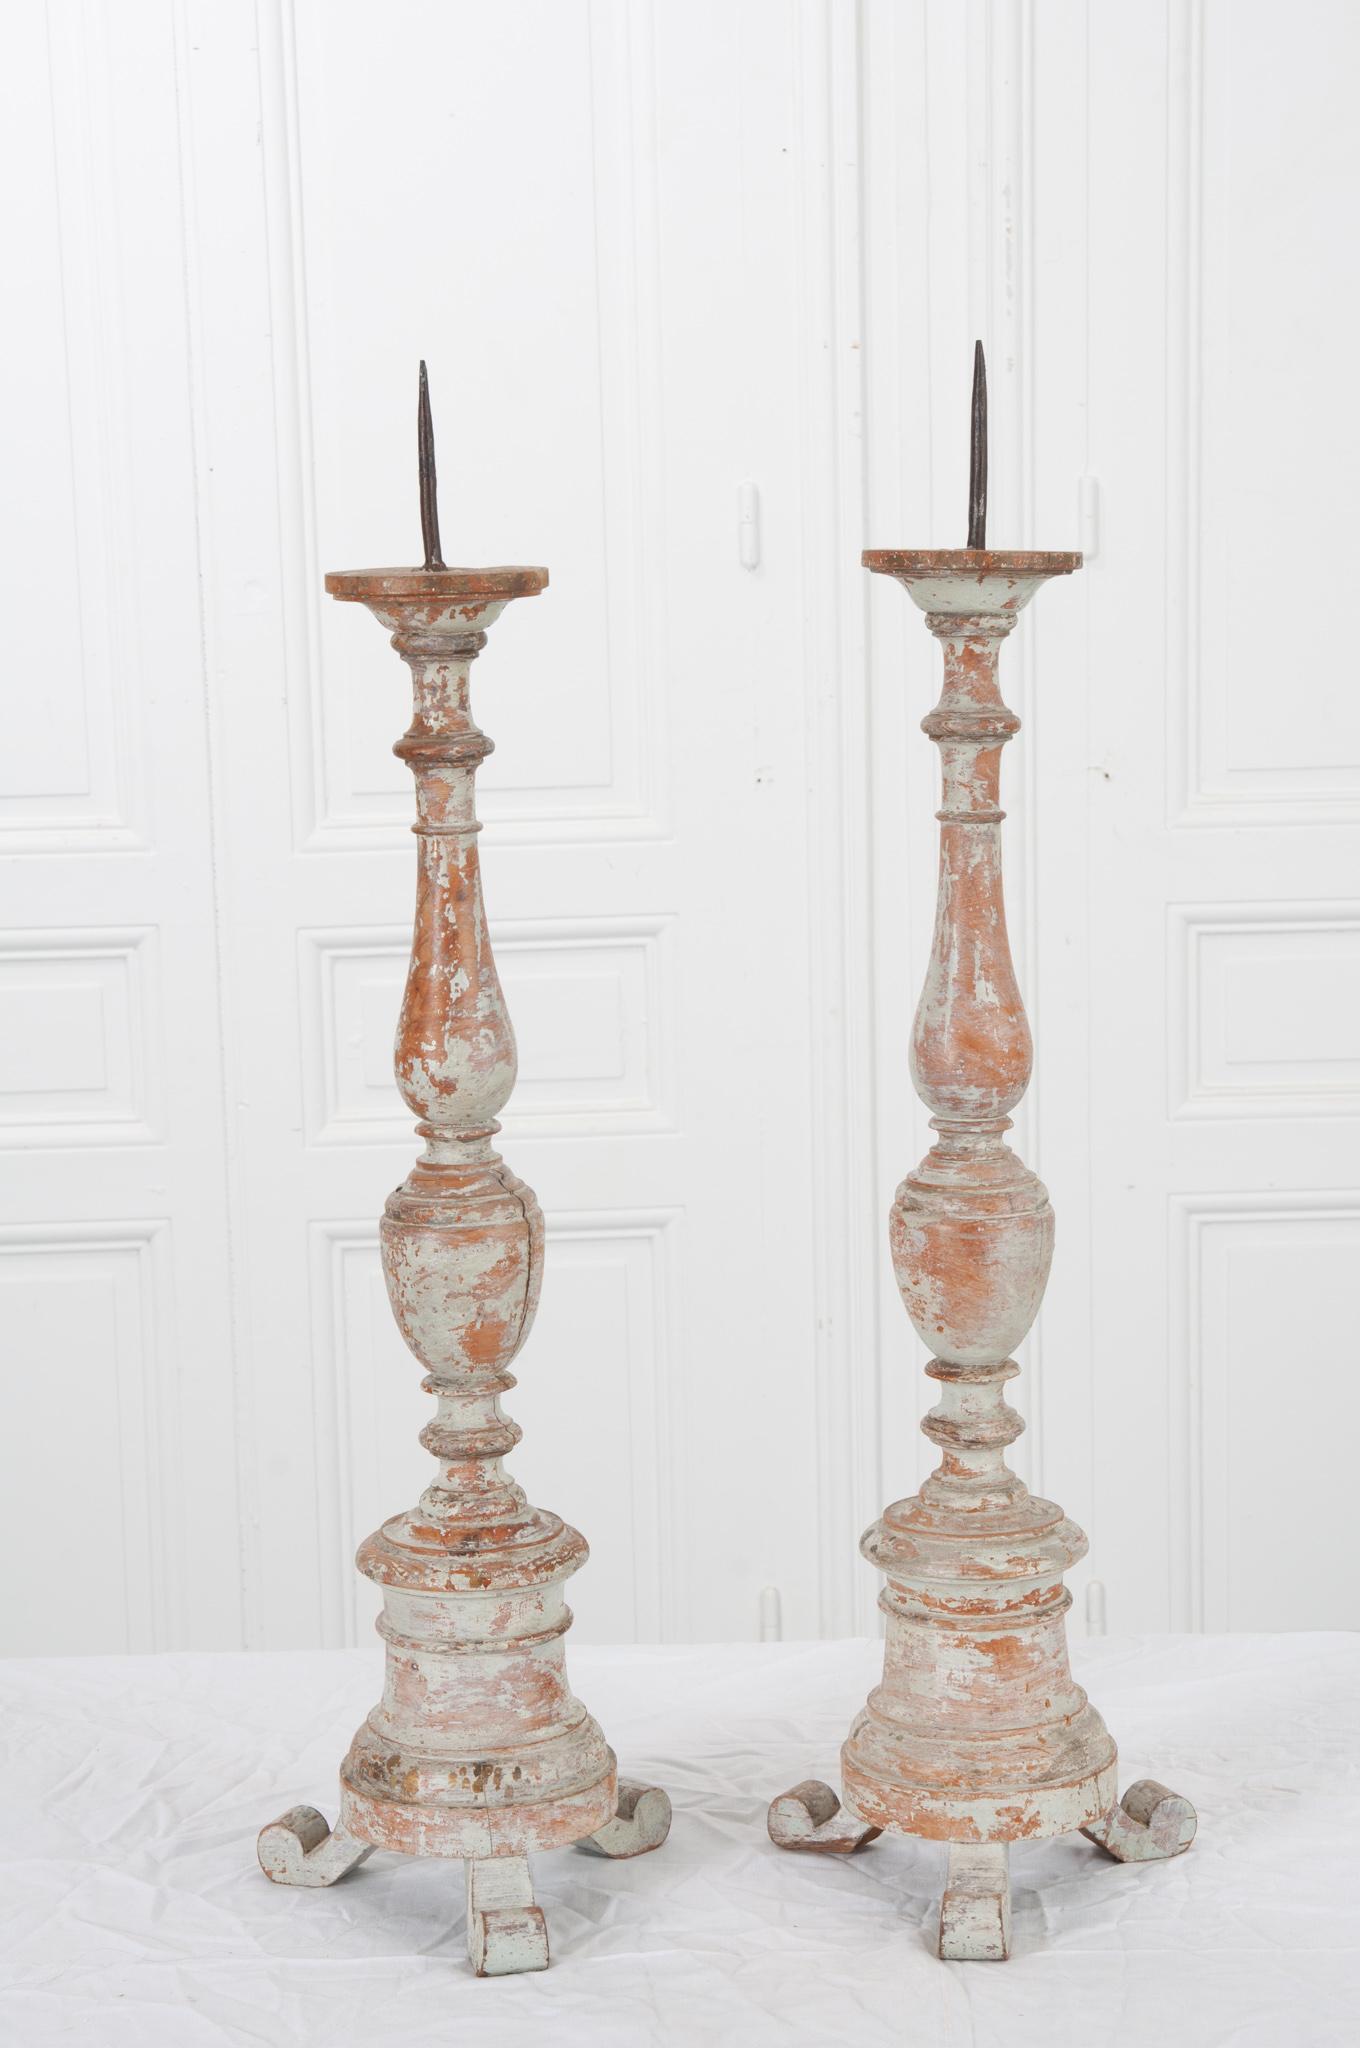 Rustic French 19th Century Pair of Candlesticks